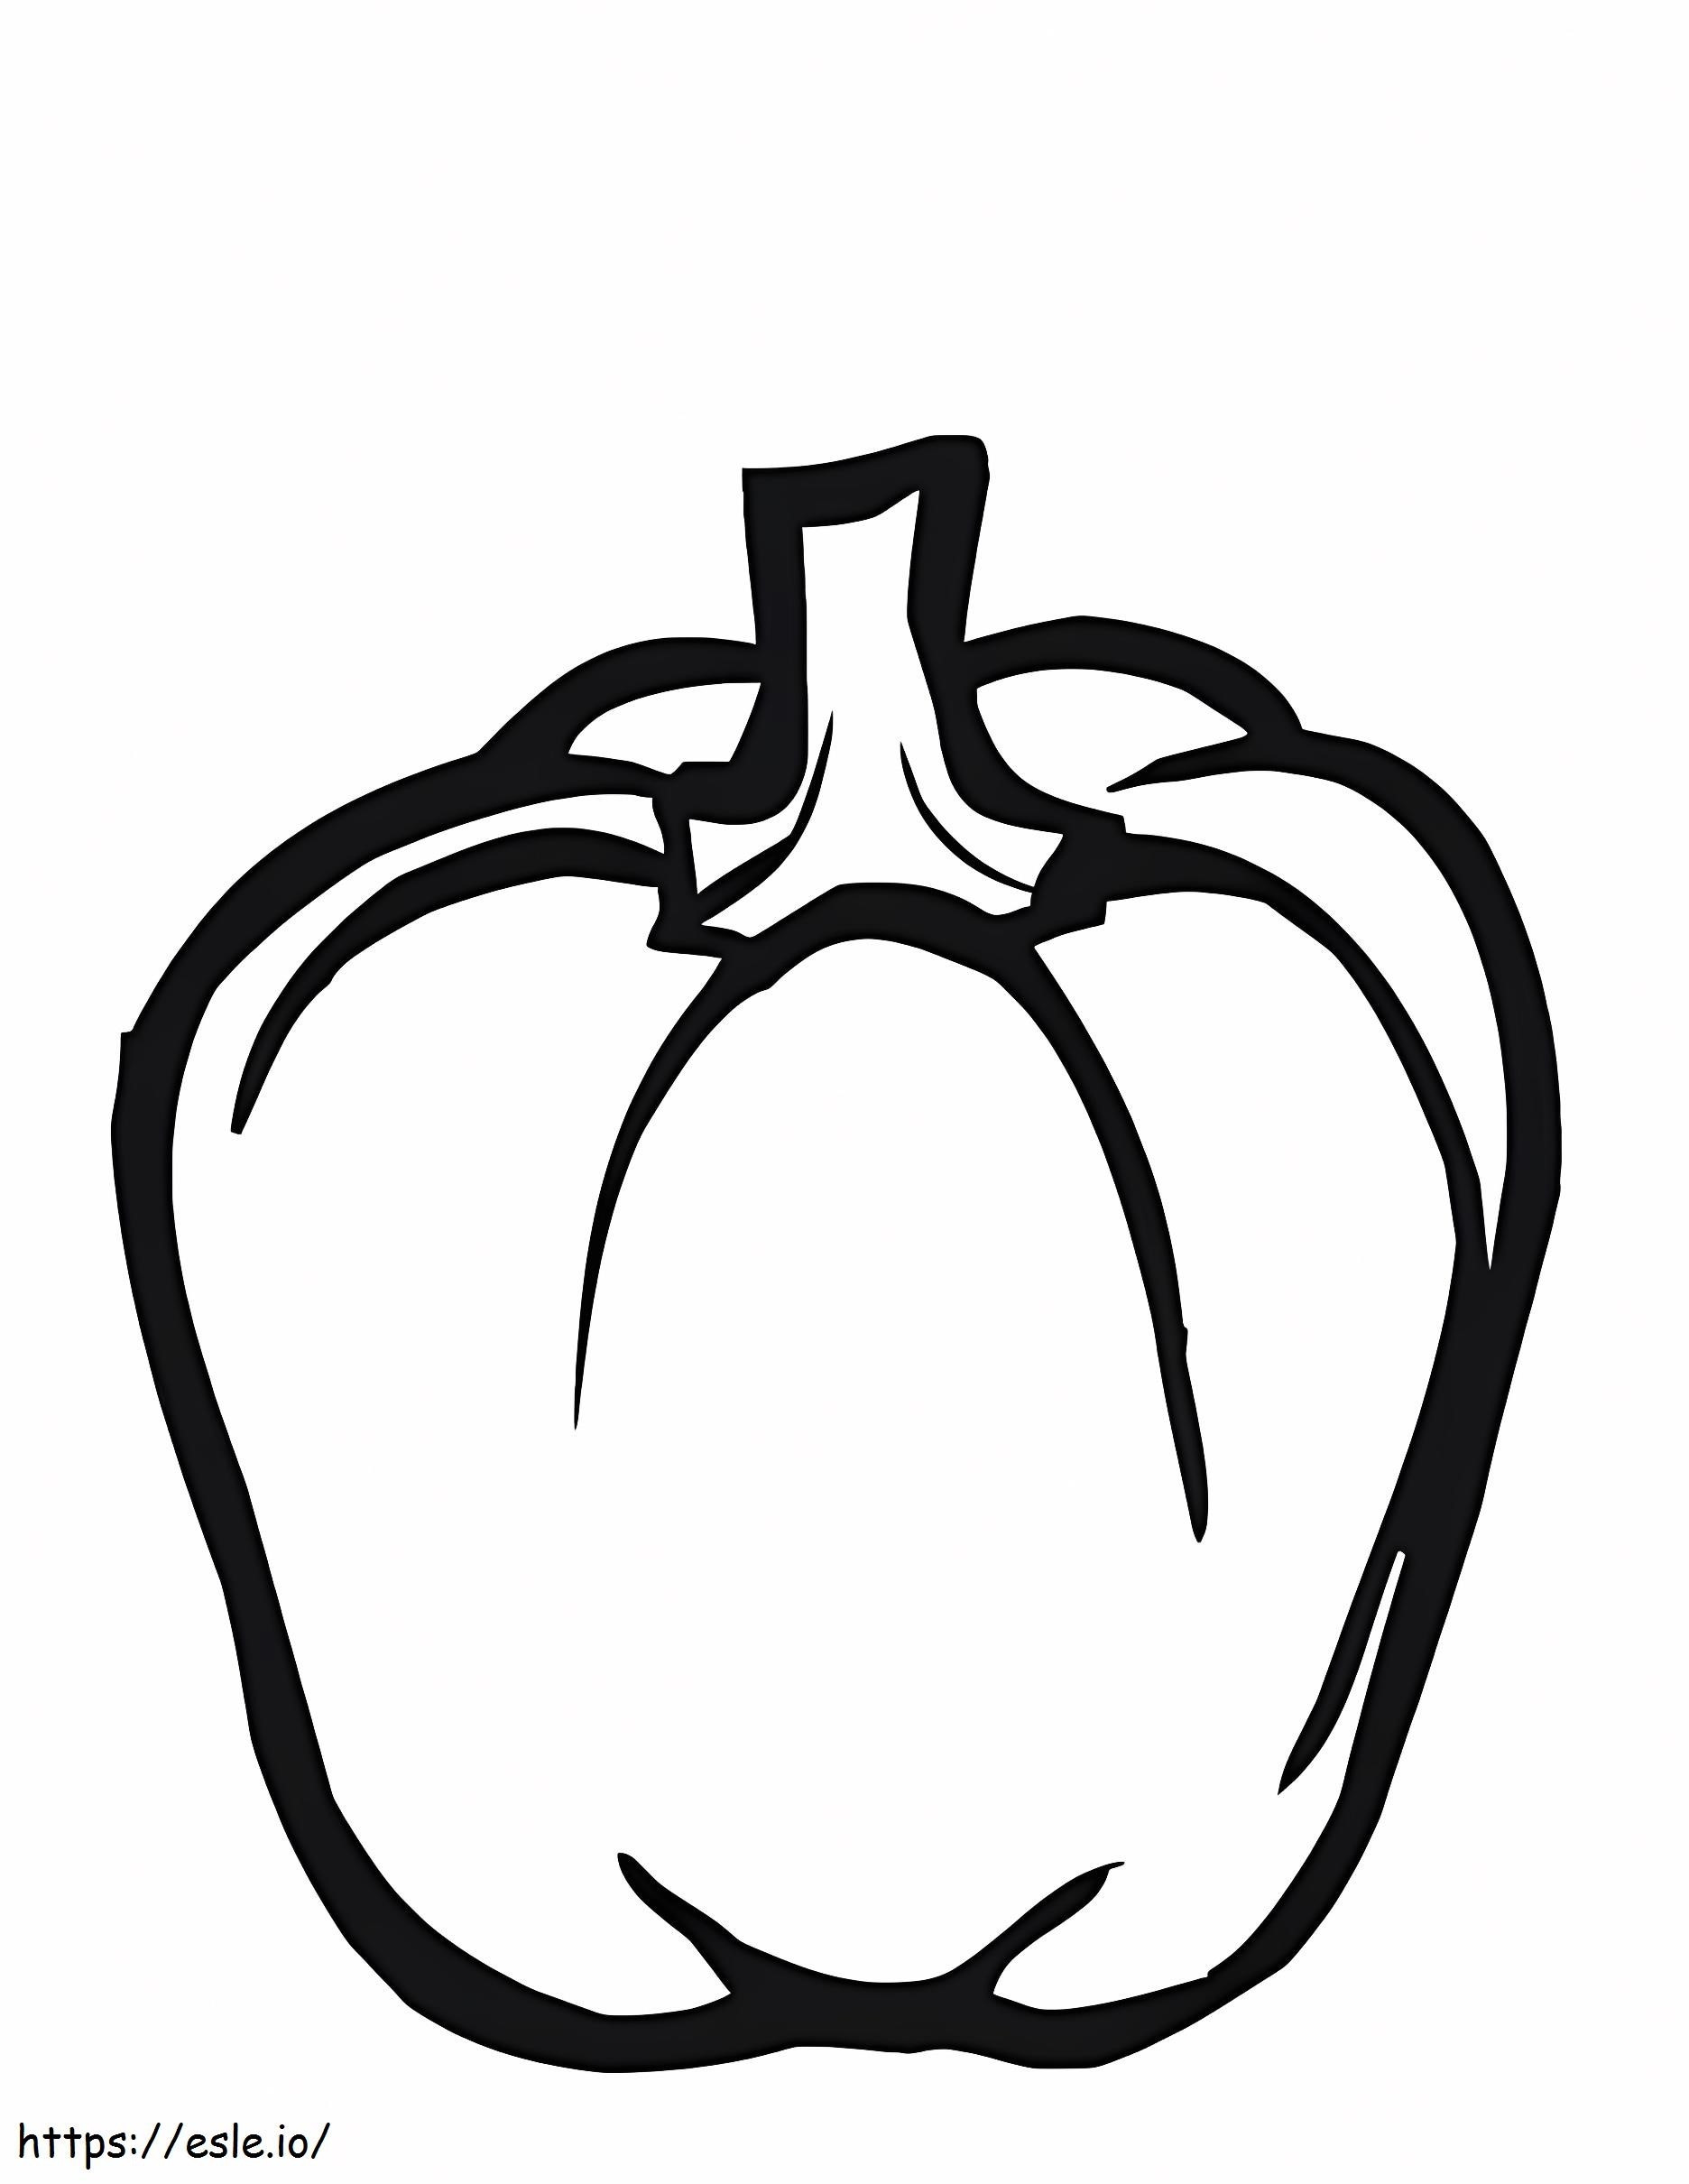 Red Peppers coloring page